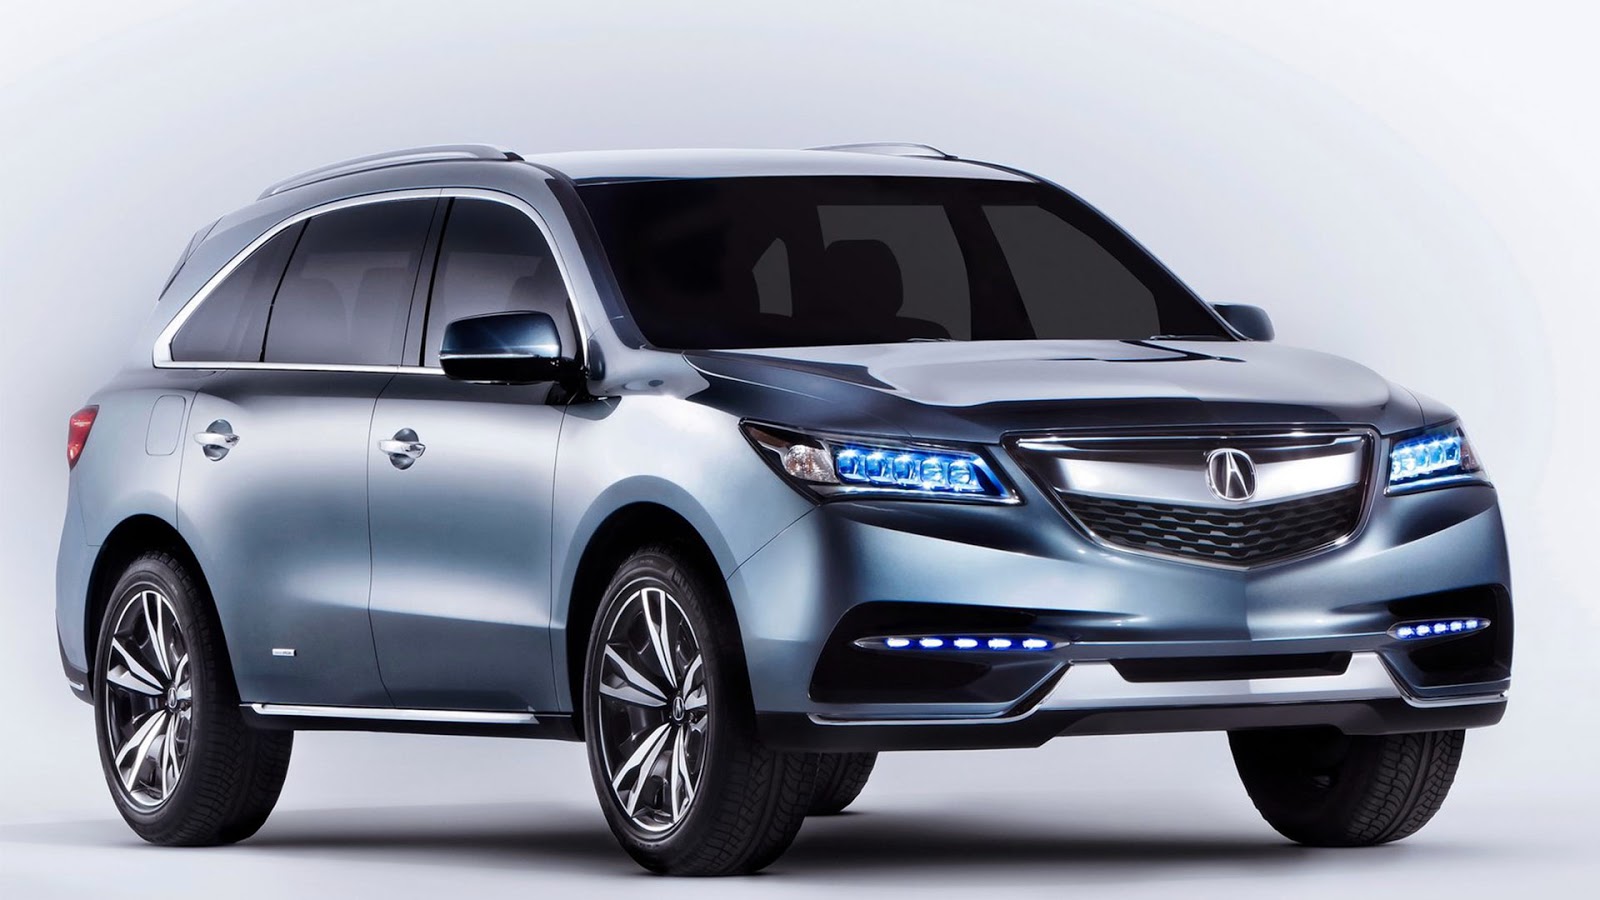 2014 Acura Mdx Exterior 2014 Acura Mdx Release Date And Price